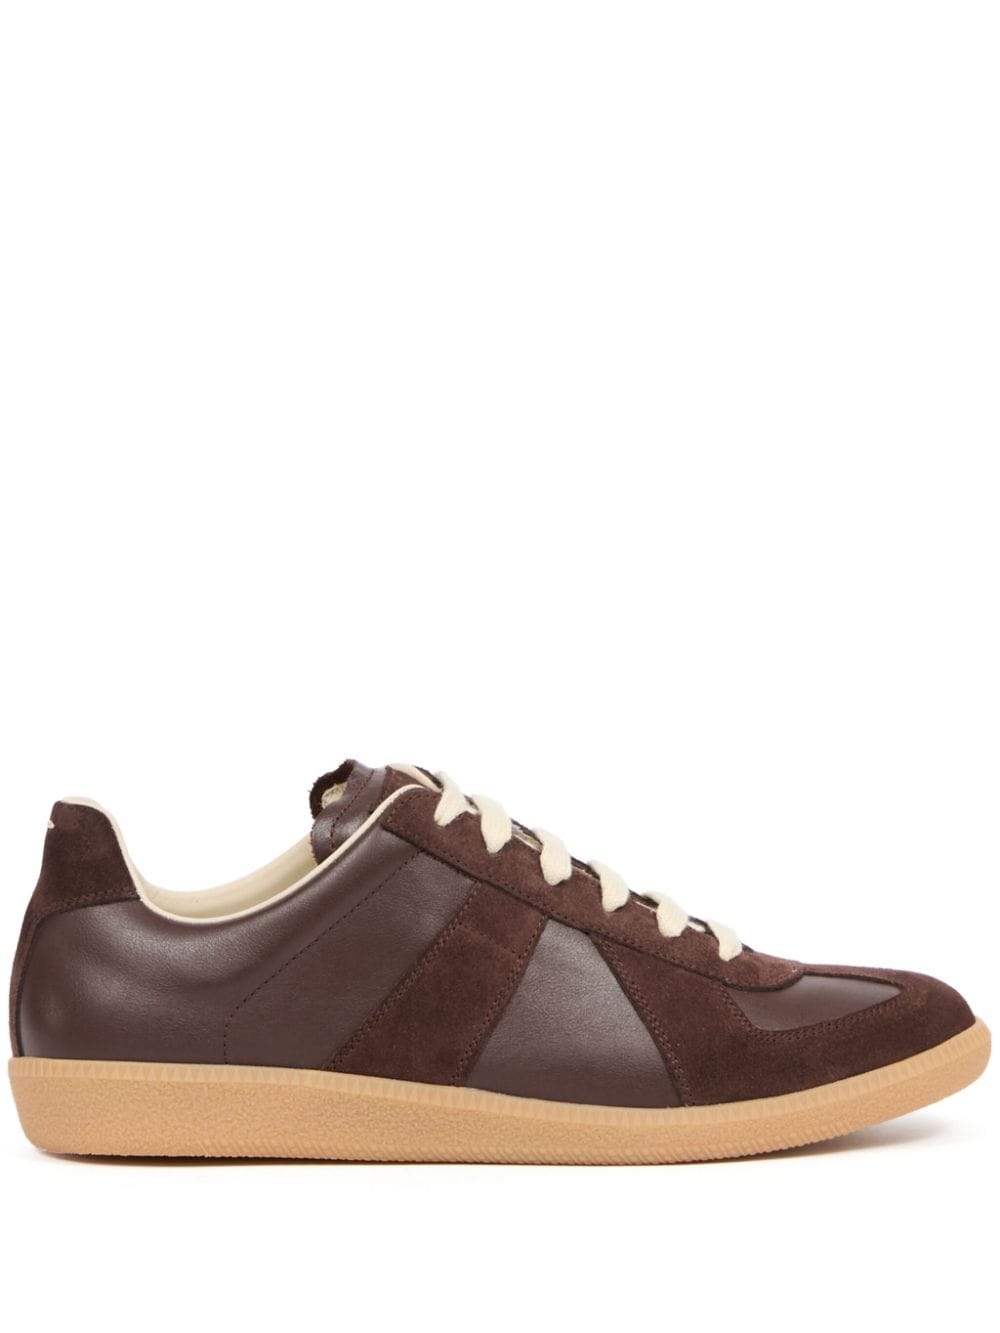 Maison Margiela Replica Panelled Sneakers In Brown